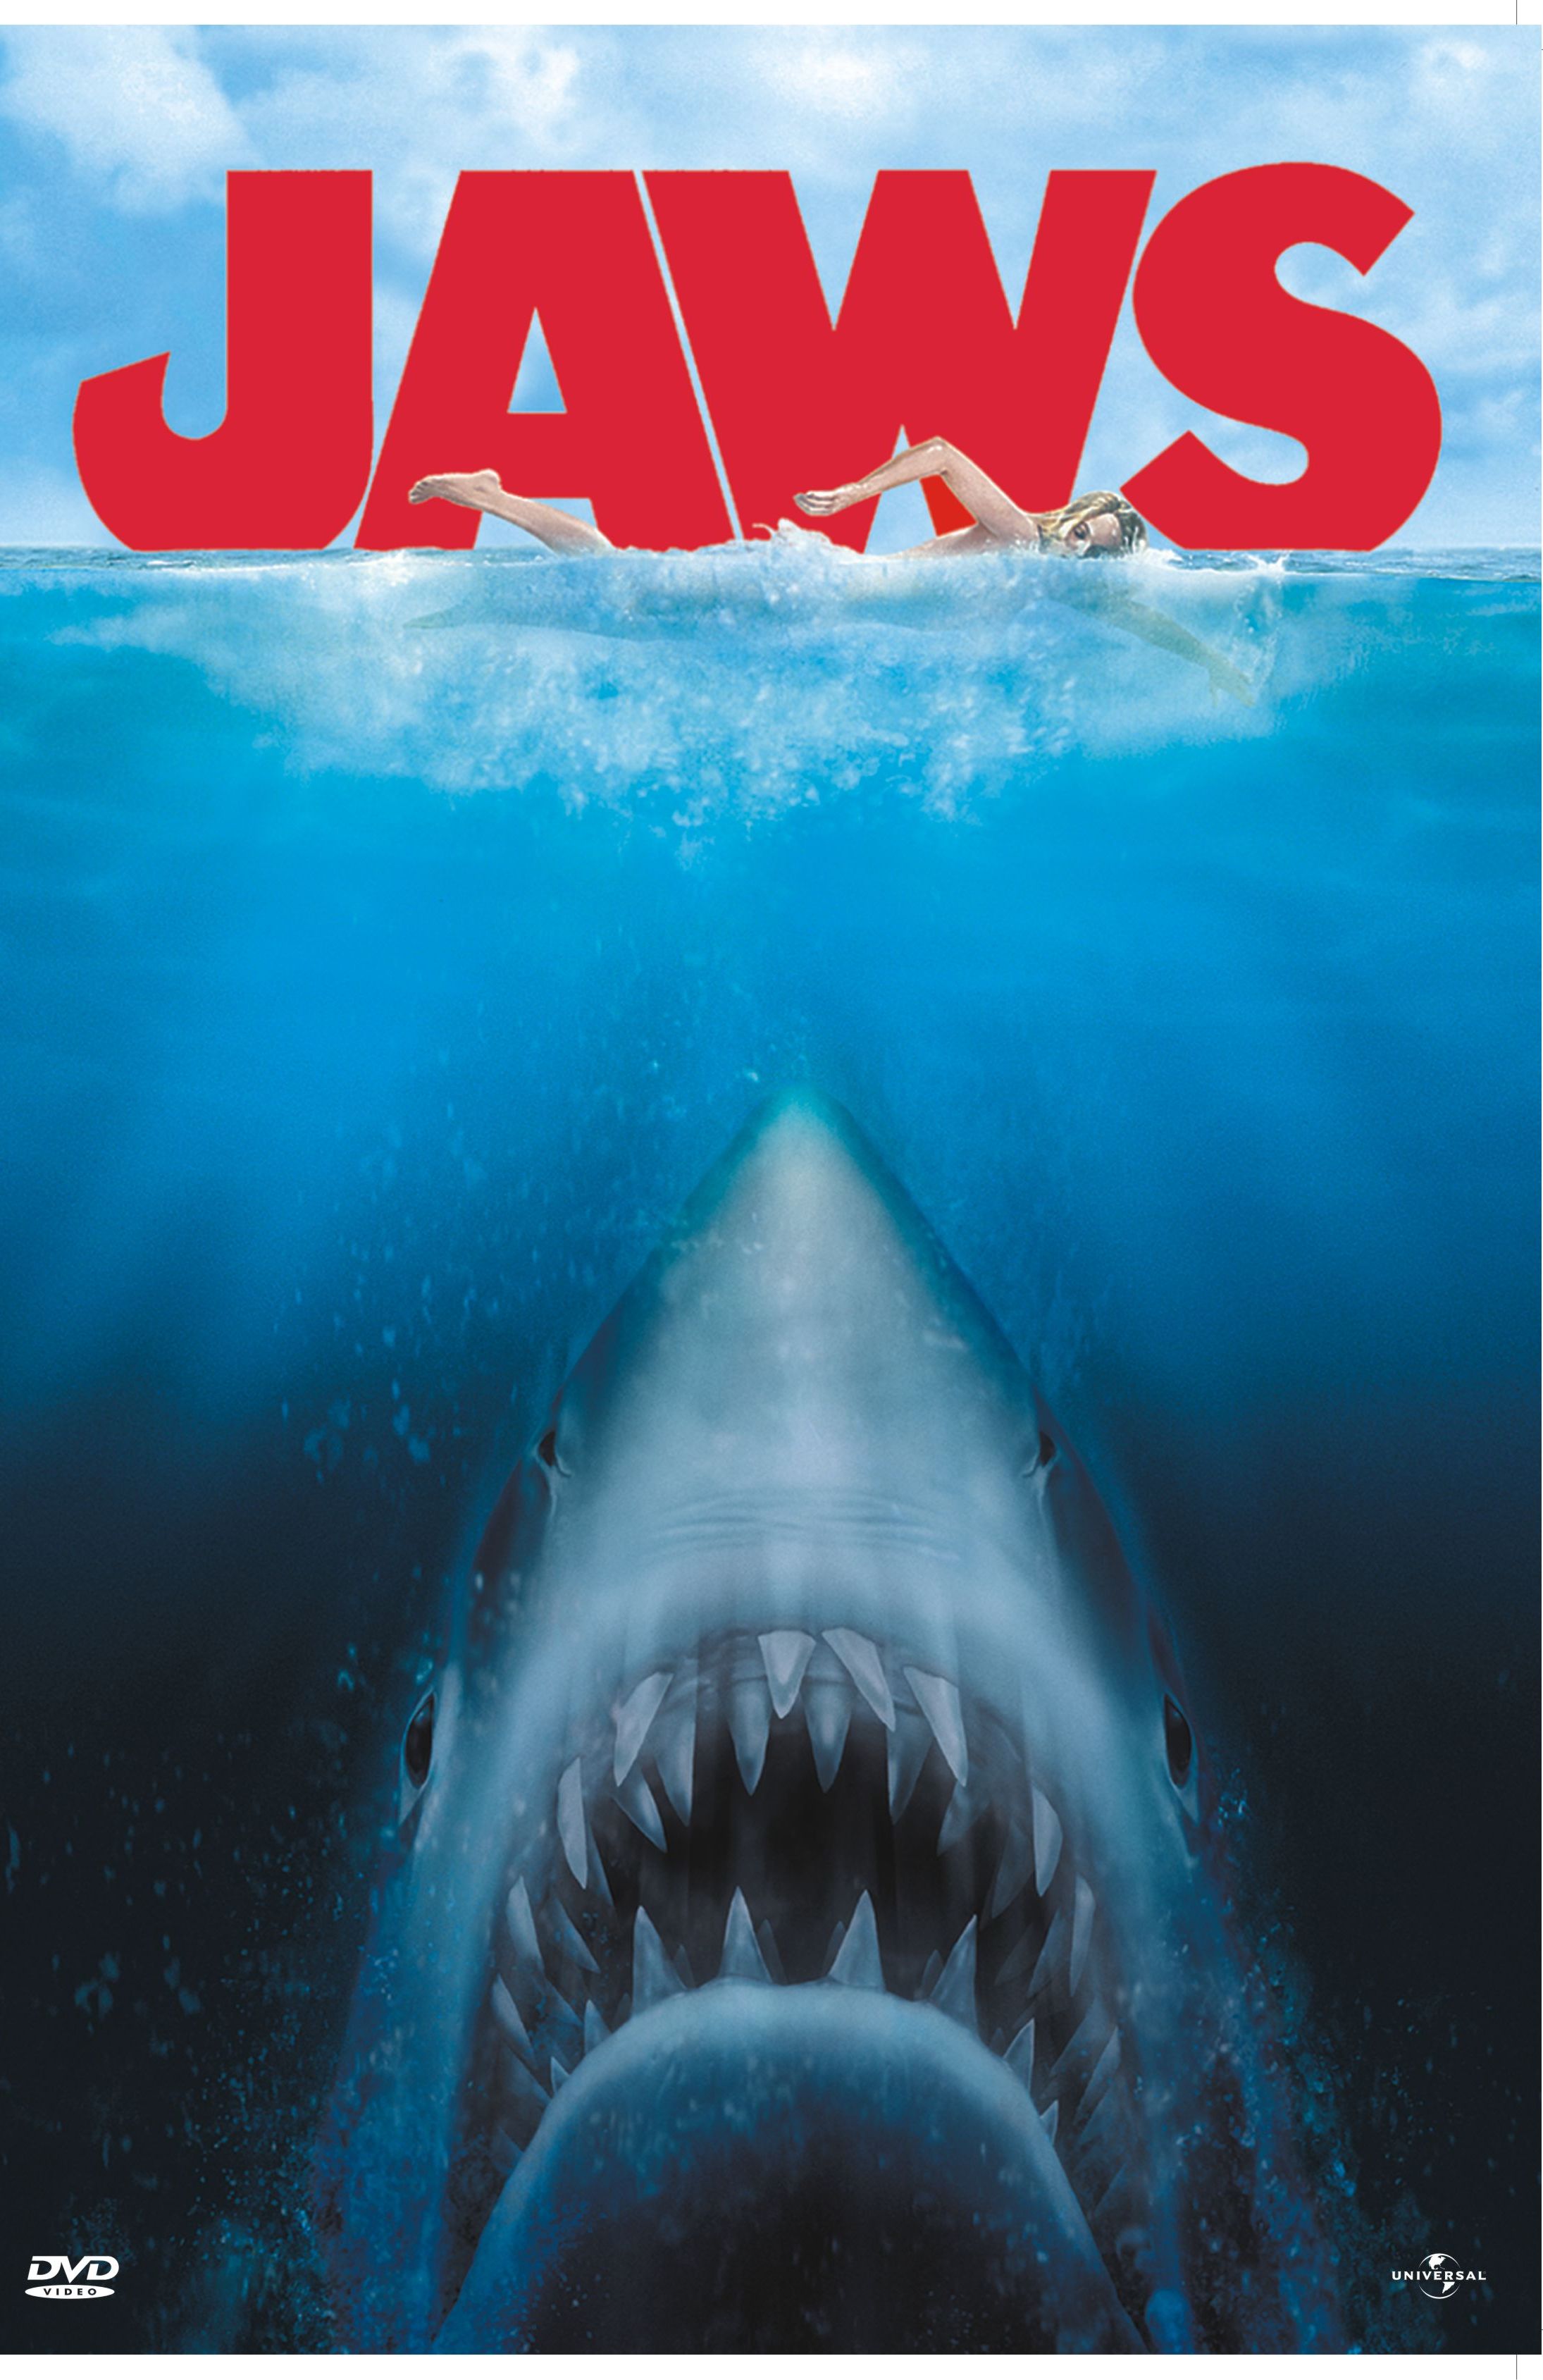 Jaws Backgrounds, Compatible - PC, Mobile, Gadgets| 2190x3377 px